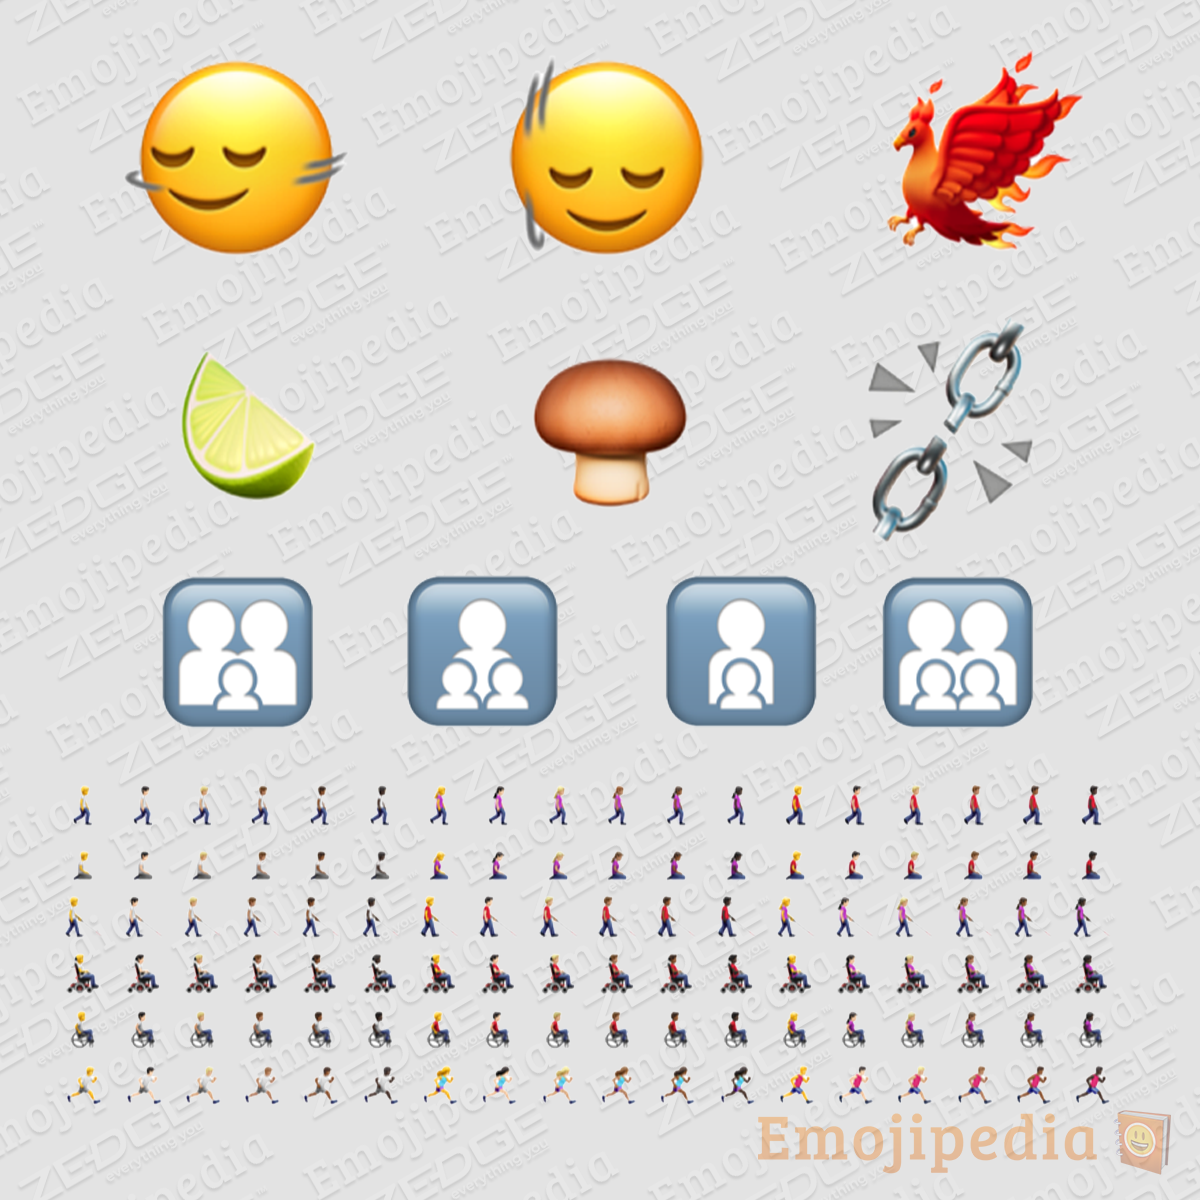 Six new emojis and more modifications are available in iOS 17.4 beta and are coming to the iOS 17.4 update in March, 2024. Credit: <a href="https://blog.emojipedia.org/first-look-new-emojis-in-ios-17-4/">Emojipedia</a>” class=”wp-image-601728 lazyload blur-up”><figcaption class=